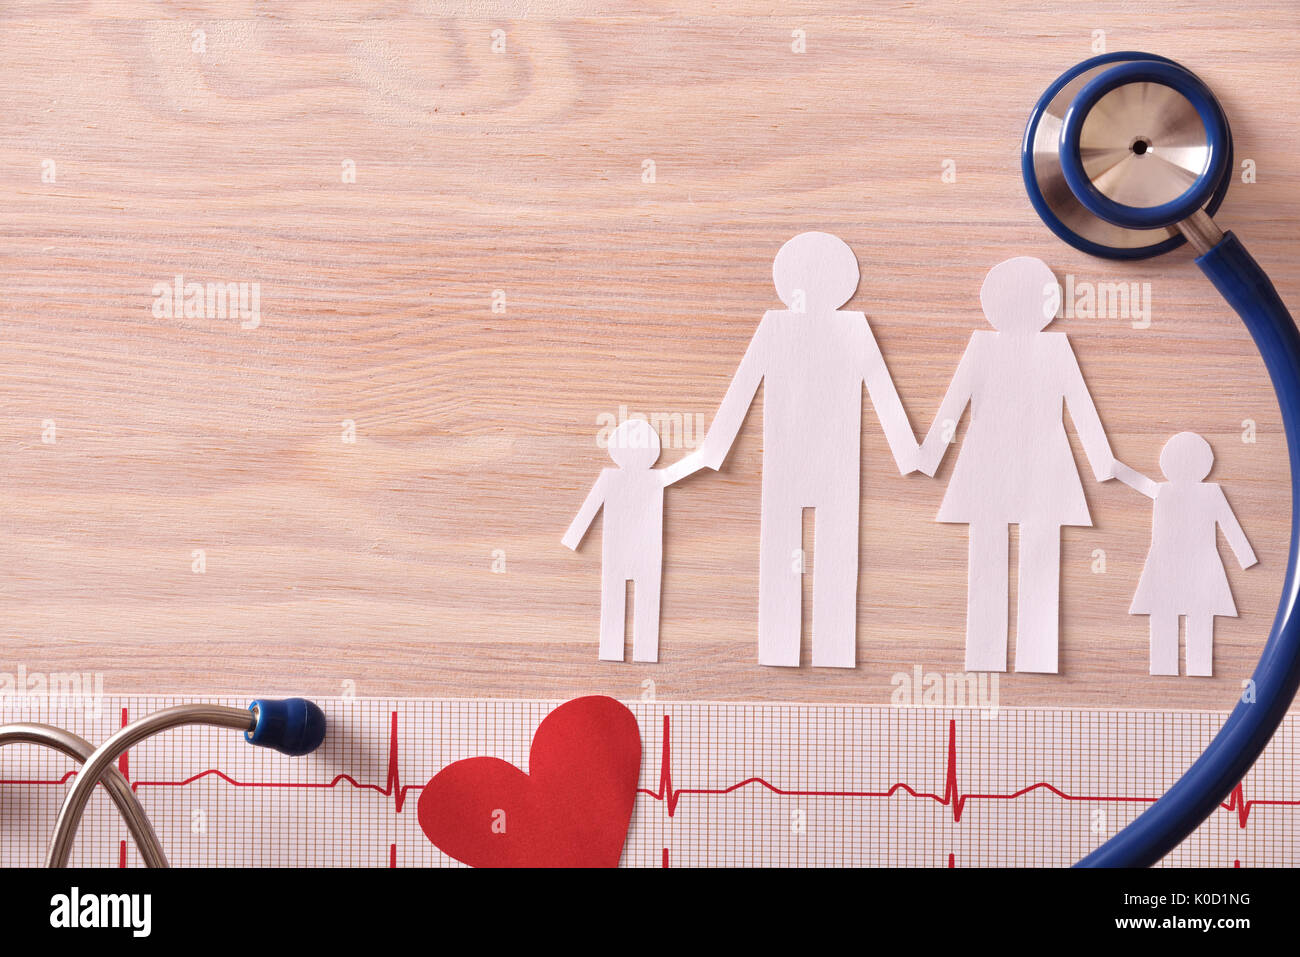 Electrocardiogram stethoscope and paper cutout heart and family on wood table. Top view. Horizontal composition. Stock Photo